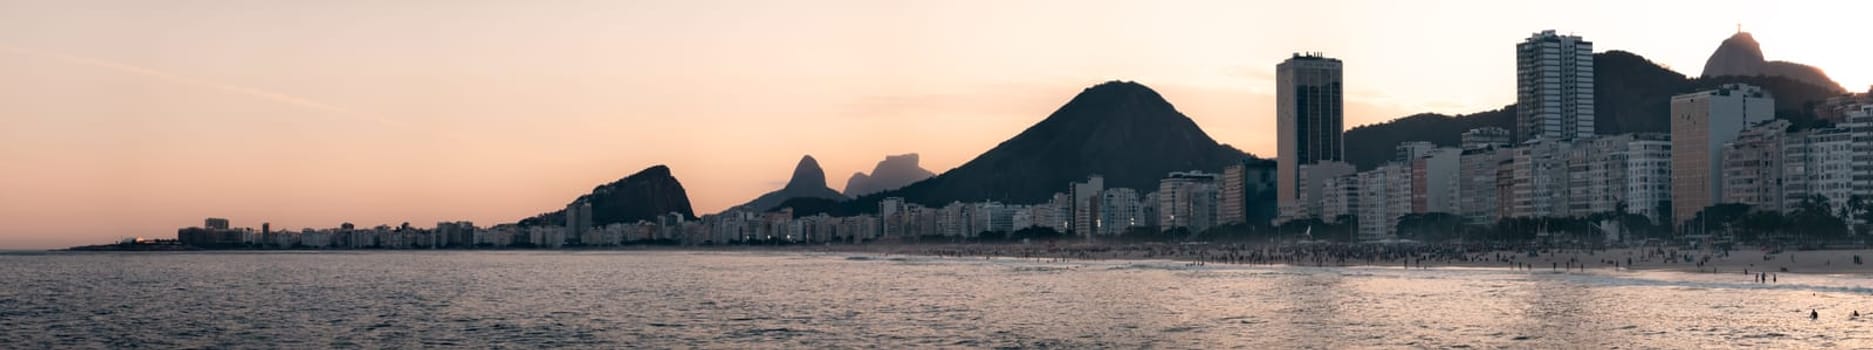 Twilight descends on Copacabana Beach, featuring modern skyline and Christ the Redeemer's iconic outline in Rio.